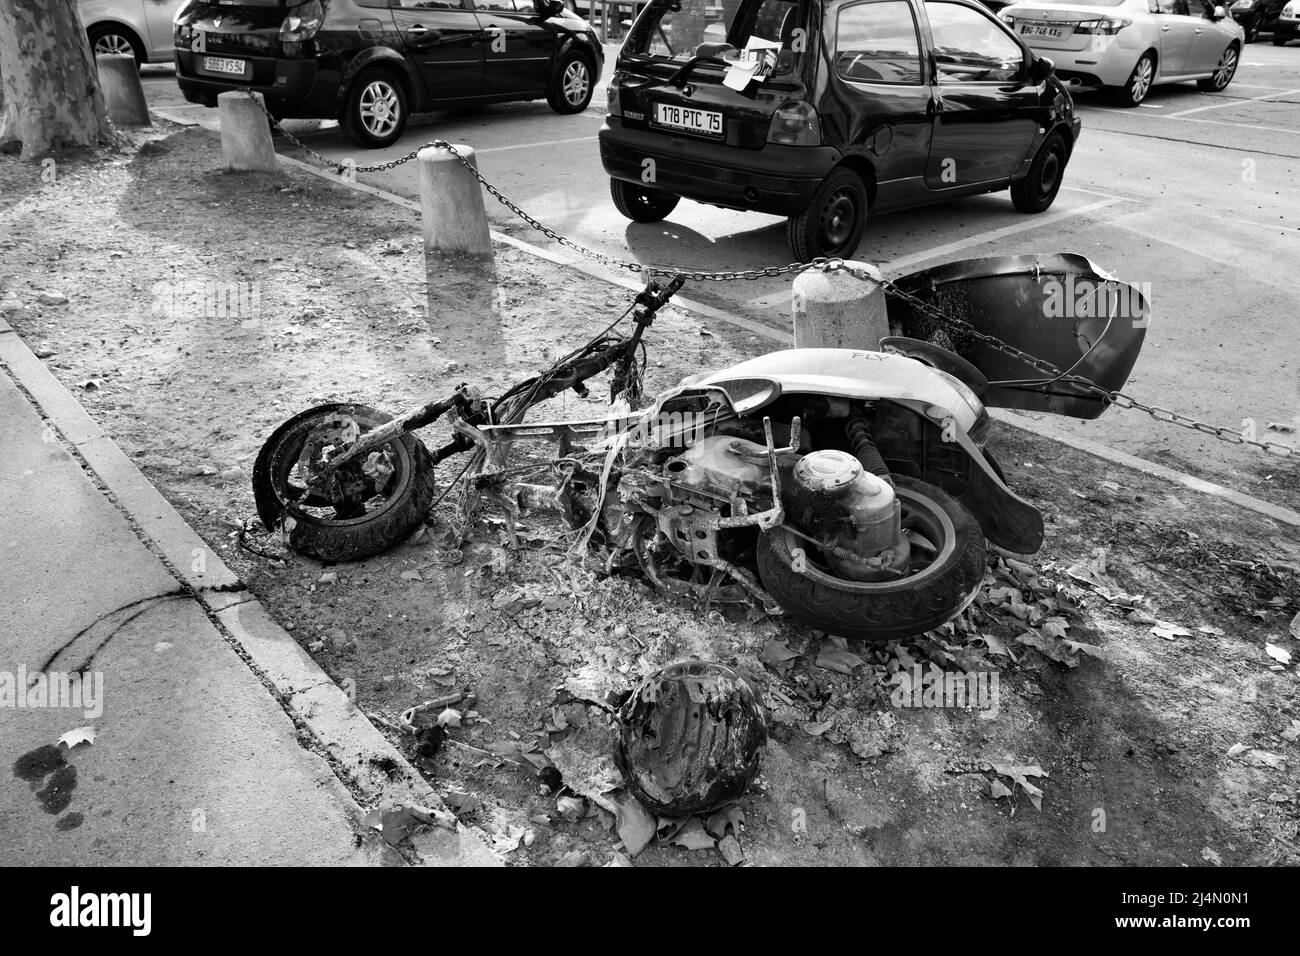 Paris, France - September 14, 2011: Burnt out motor scooter at car park. Black and white photography Stock Photo